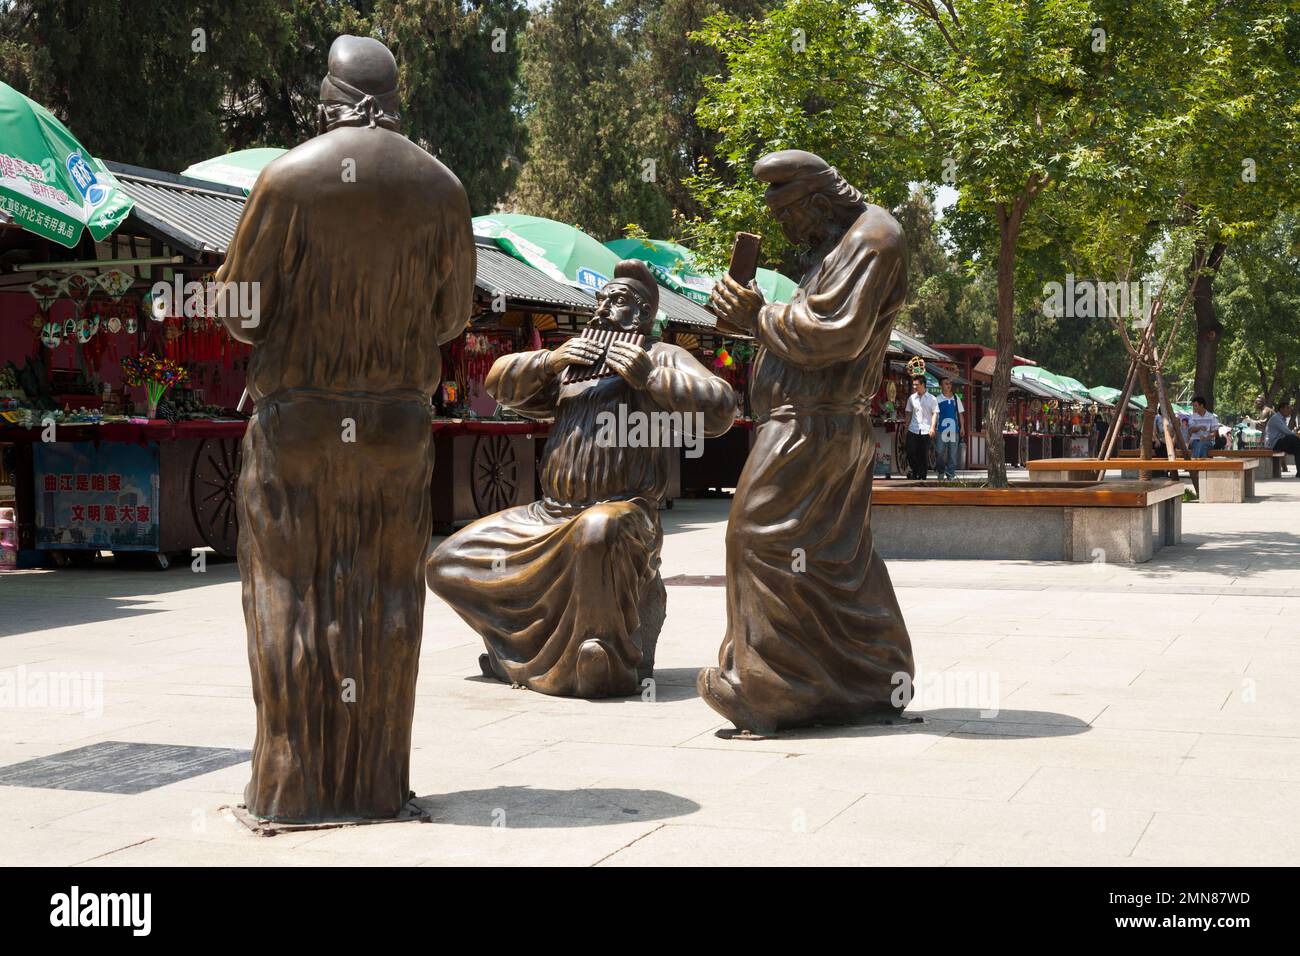 Musician figures / musicians / band paixiao pipe troupe bronze metal sculpture statue in grounds of Daci'en Temple, Buddhist temple in Yanta District, Xi'an, PRC, China. (125) Stock Photo